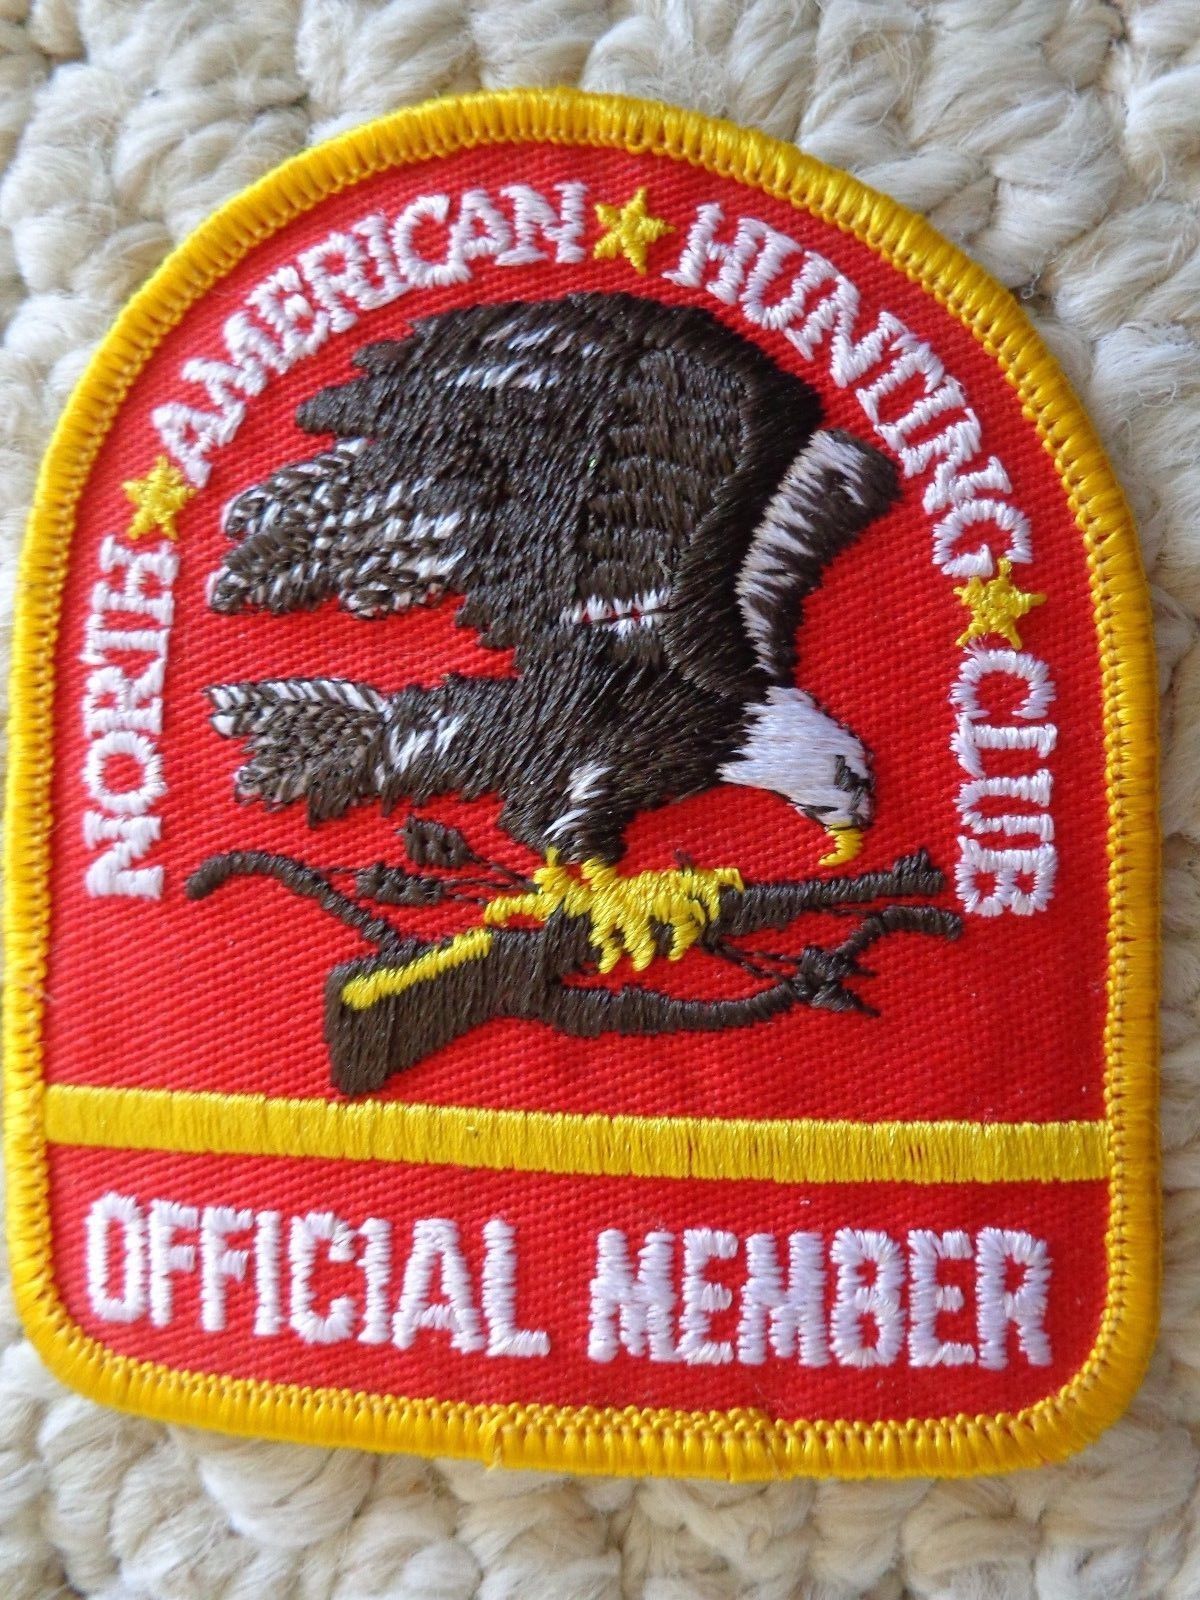 Primary image for North American Hunting Club Official Member Stitch-on Patch (#0884)